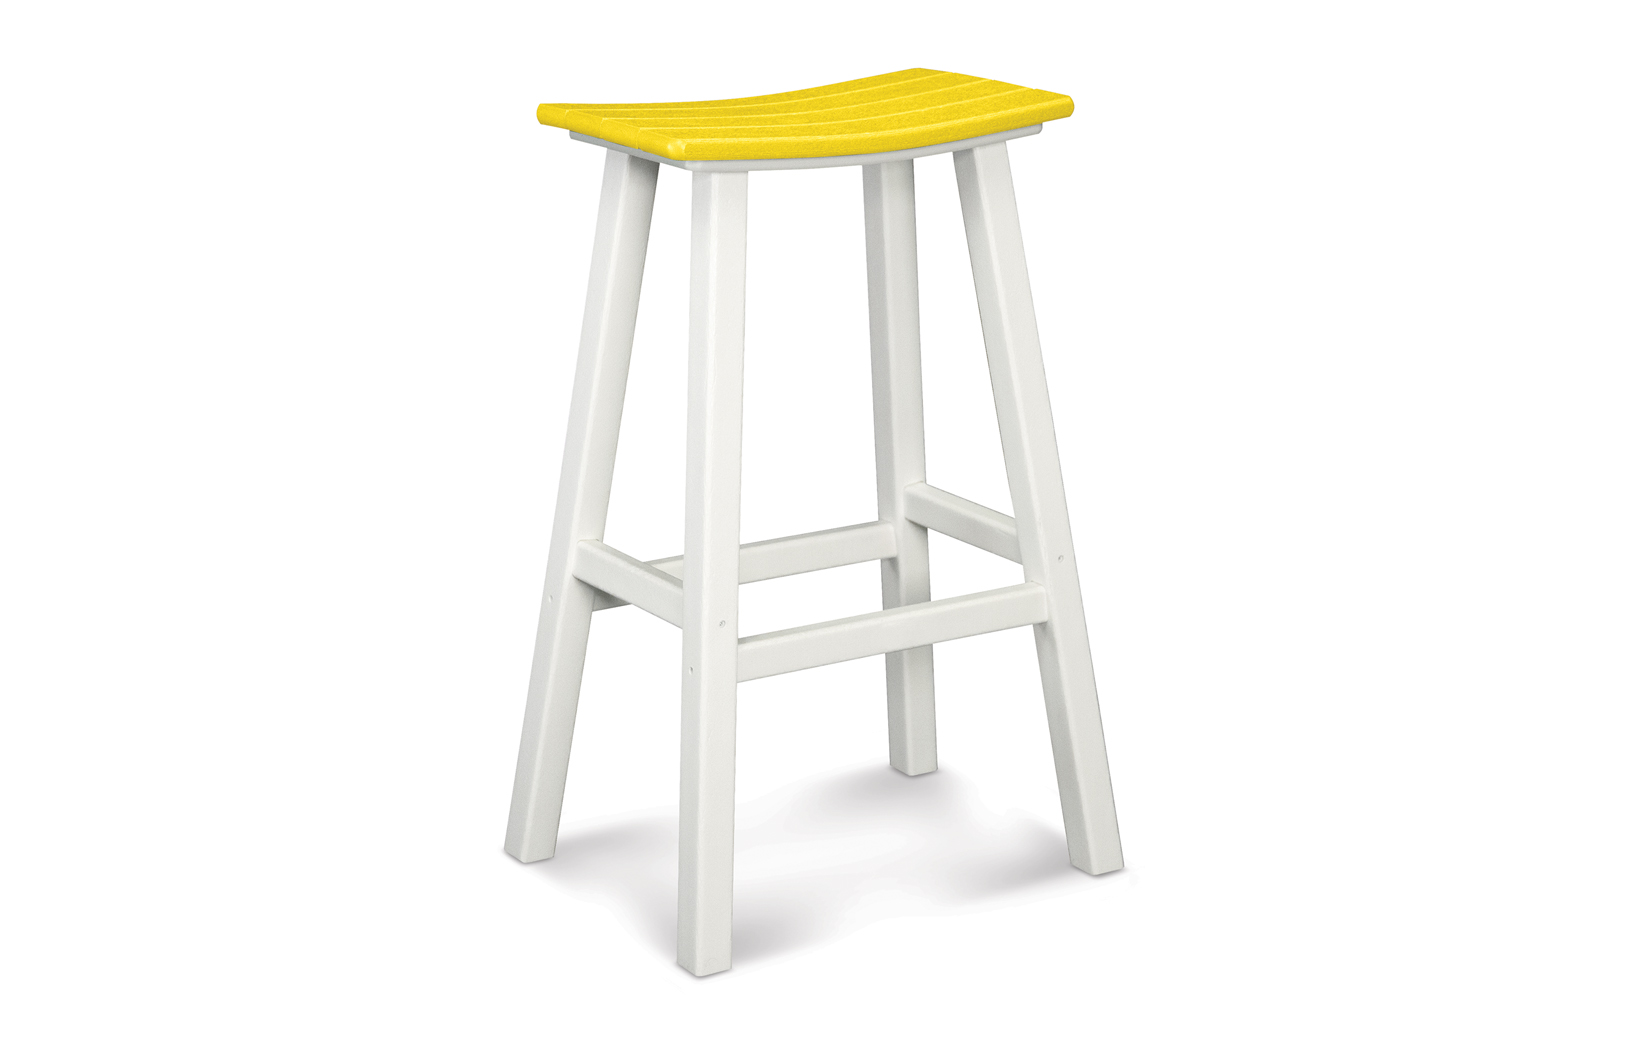 Texawood Breeze Collection Contempo Bar Stool